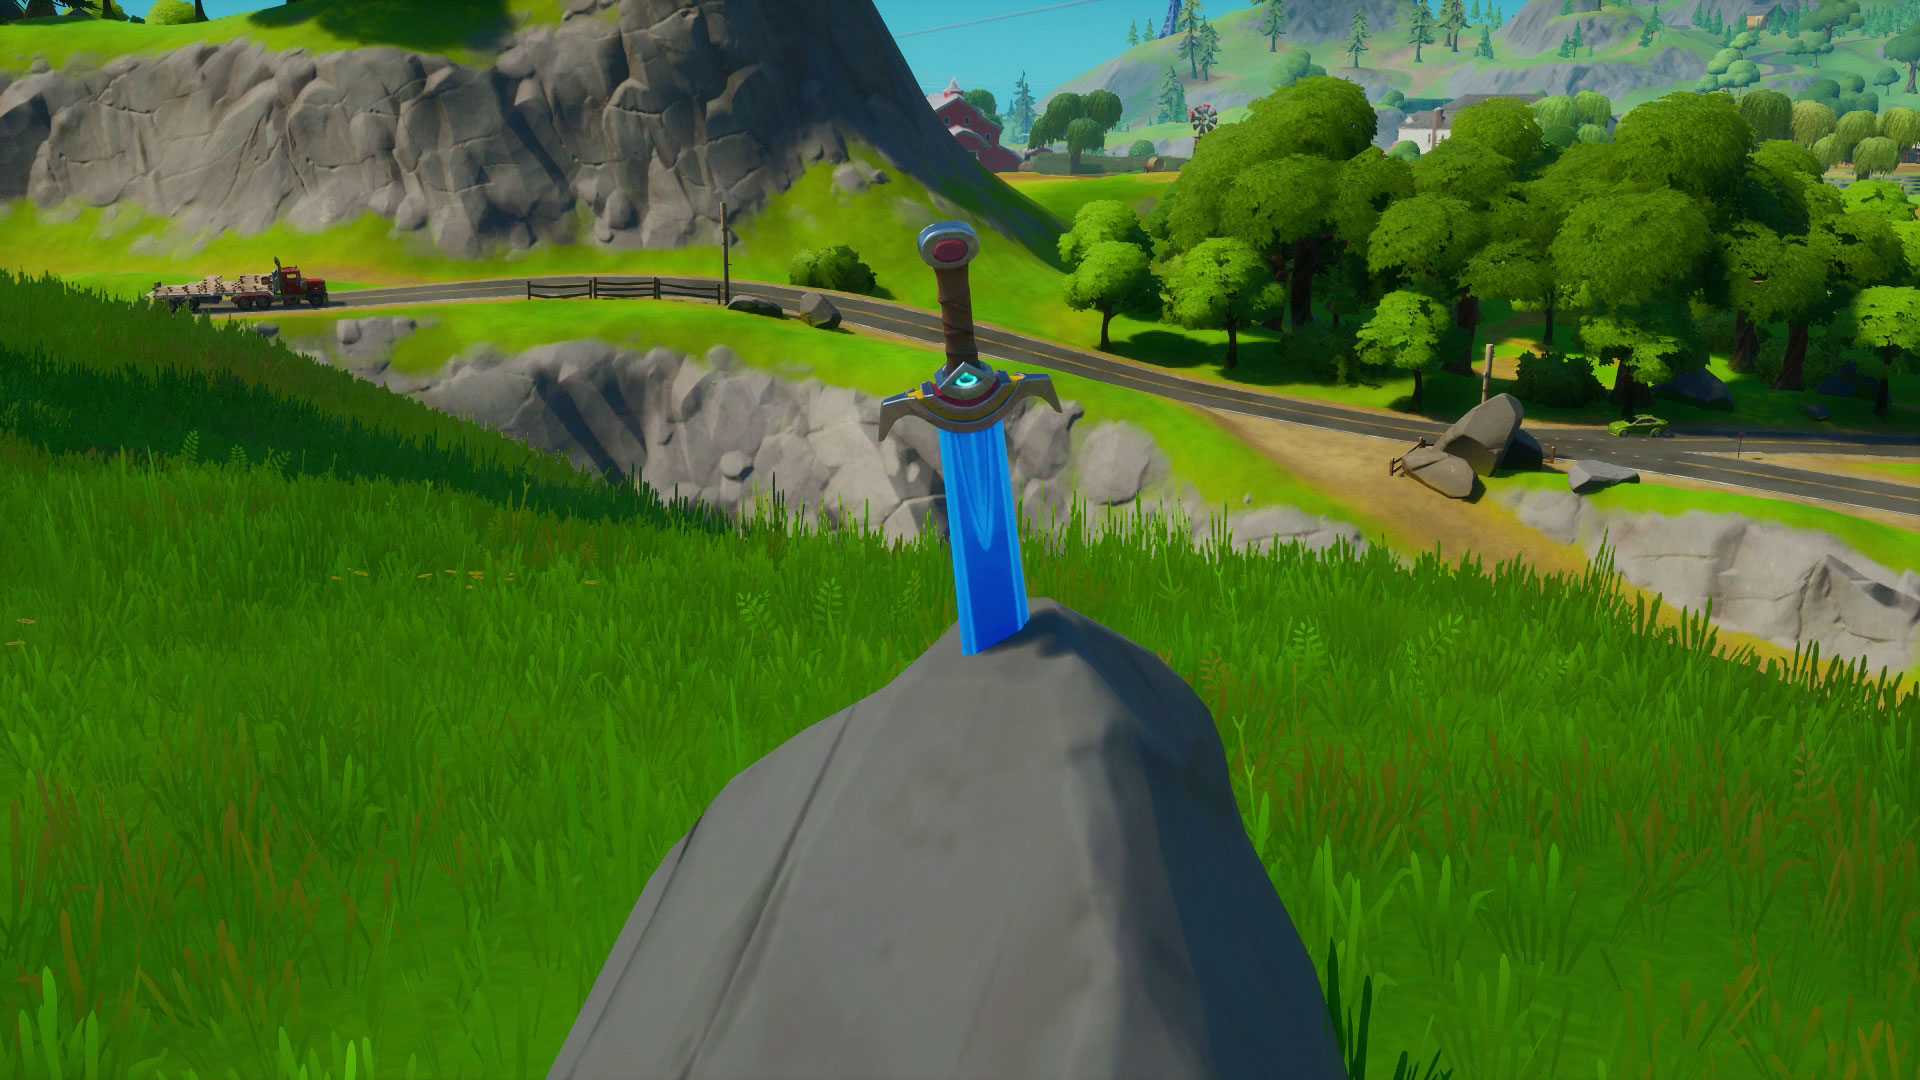 Fortnite Skye S Sword Locations Where To Search Skye S Sword In A Stone Found In High Places Gamesradar - roblox island 2 how to get stone